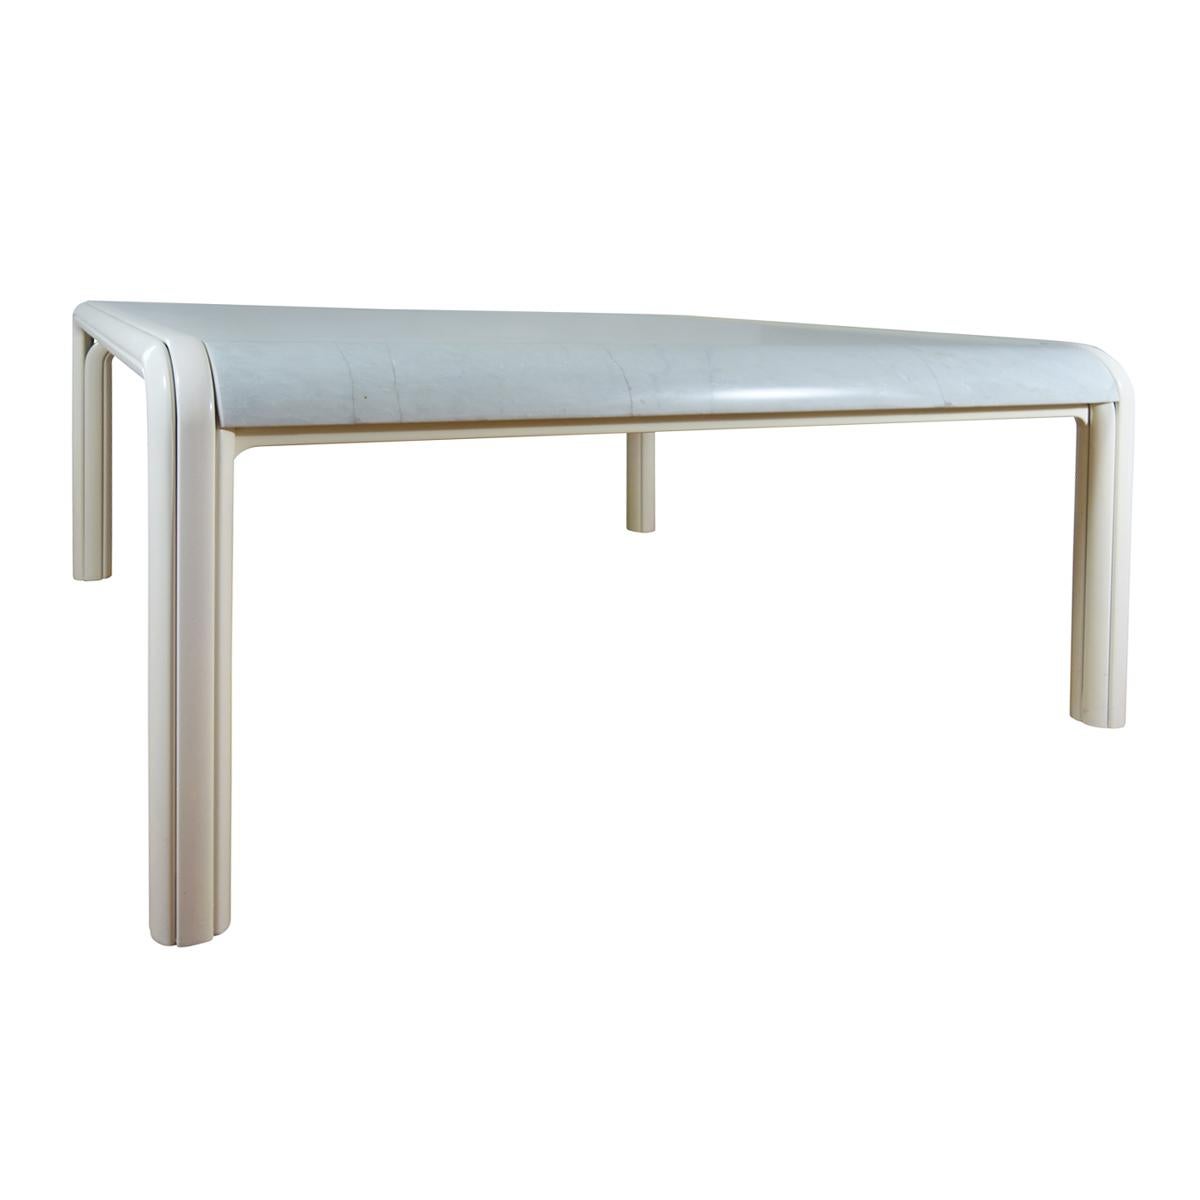 Very rare version of the Orsay series designed in 1969 by Gae Aulenti for Knoll International.
The square table is very spacious (57 inch x 57 inch / 145 cm x 145 cm). It is made of aluminum and has a solid top made of Carrara marble. The marble